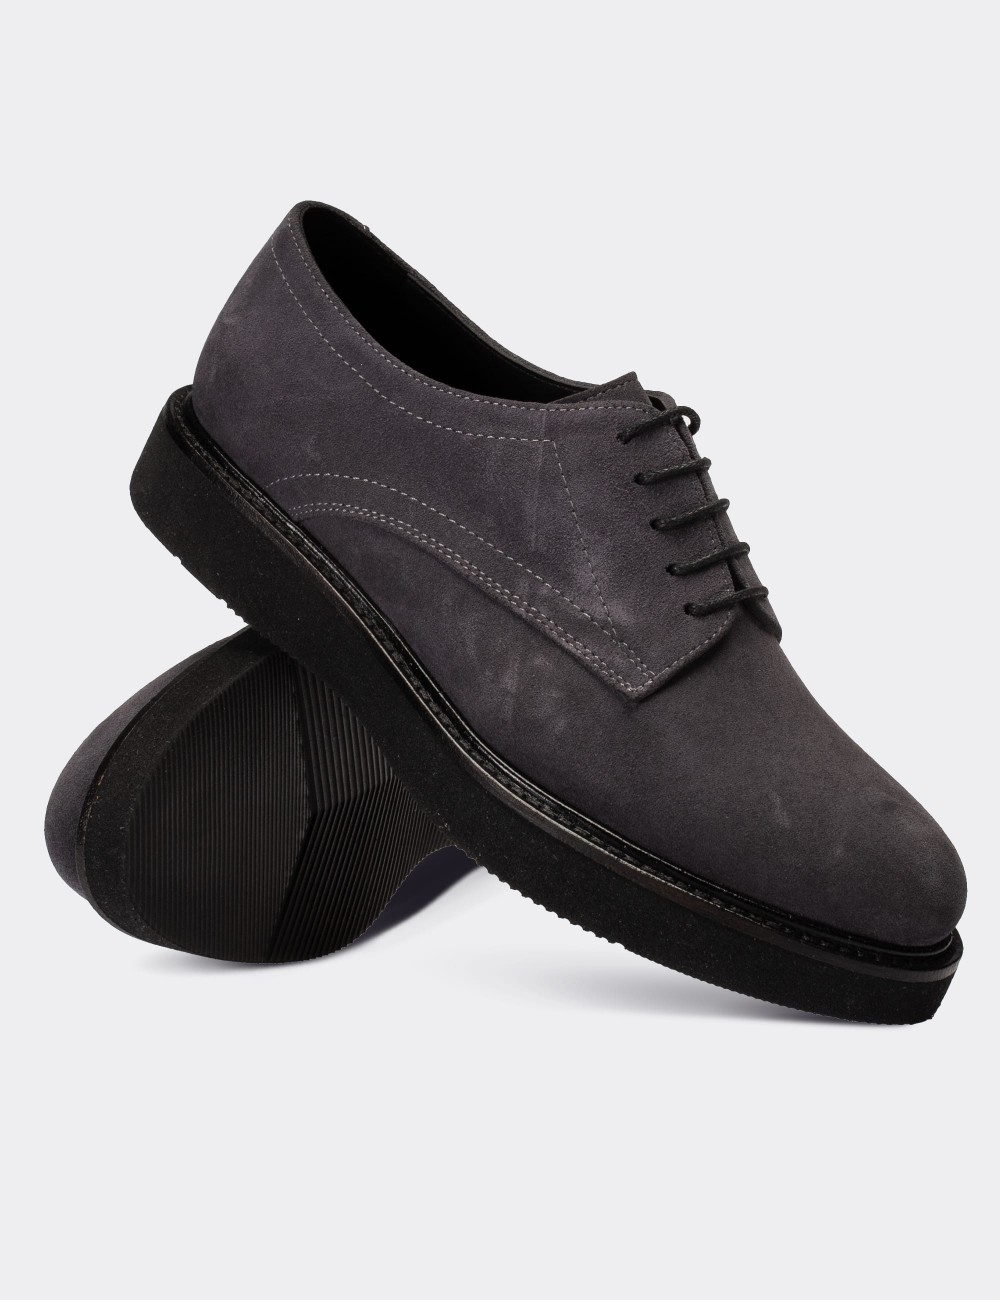 Gray Suede Leather Lace-up Shoes - 01430ZGRIE04